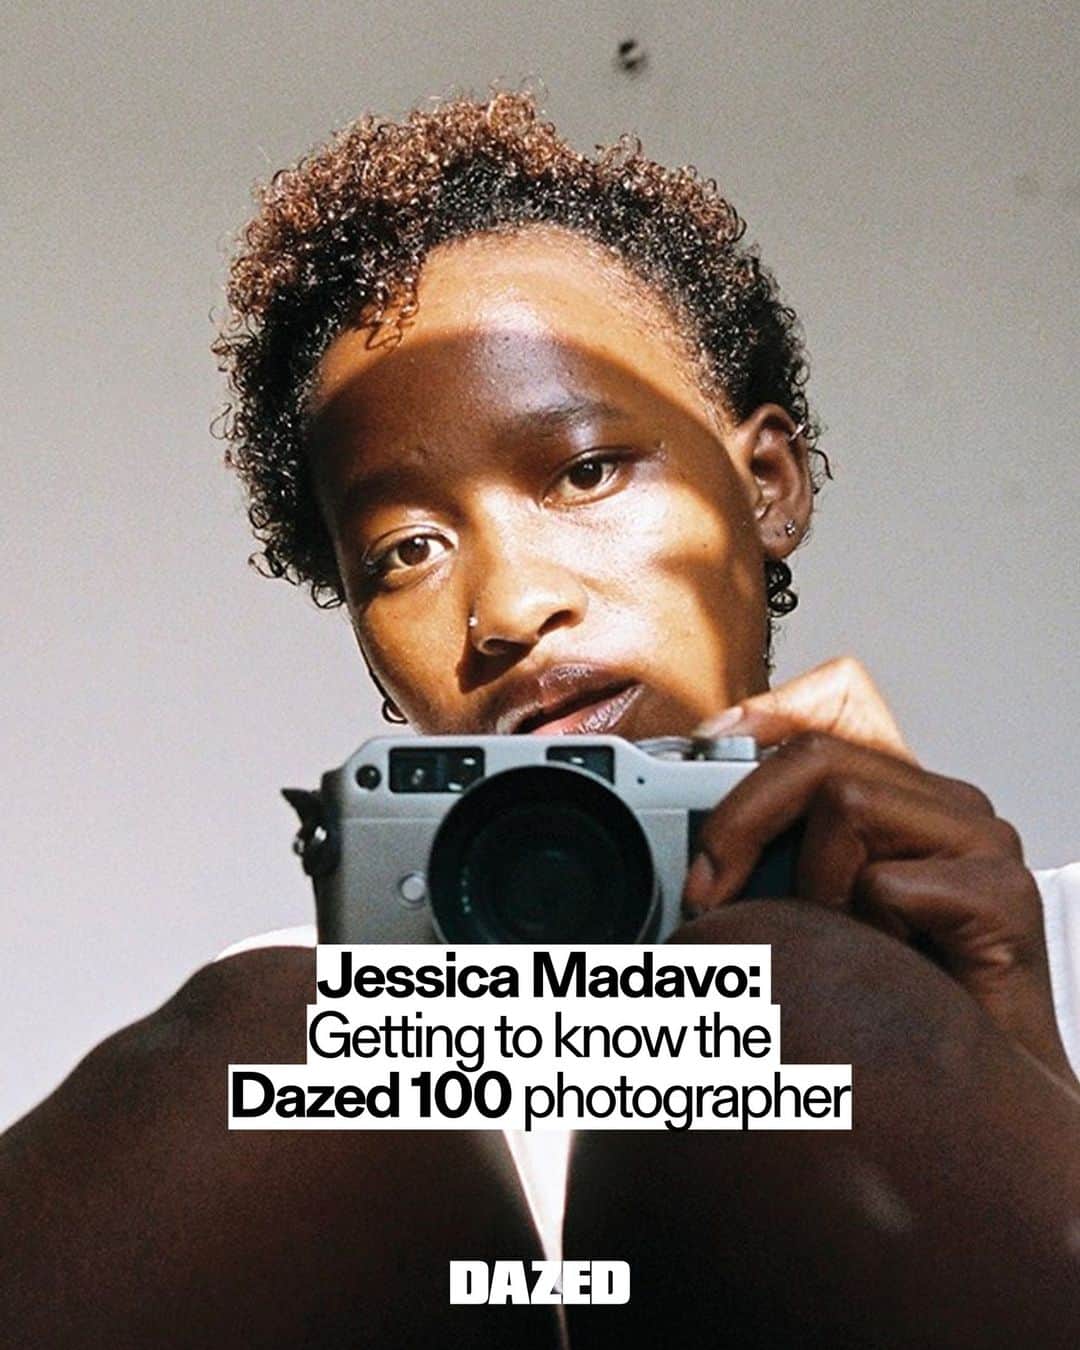 Dazed Magazineのインスタグラム：「"It’s the frozen moments my eye is tickled by," photographer @jessicamadavo tells Dazed. "Responding to what’s happening around me and how it makes me feel."⁠ ⁠ In the wake of her #Dazed100 nomination, we speak to the South African-born visual artist about the inspirations behind her compelling images, future aspirations, and why her star sign is cancer through and through.⁠ ⁠ Read the full interview through the link in our bio 🔗⁠ ⁠ 📷 @jessicamadavo⁠ ✍️ @ohnoitsemilyd⁠」